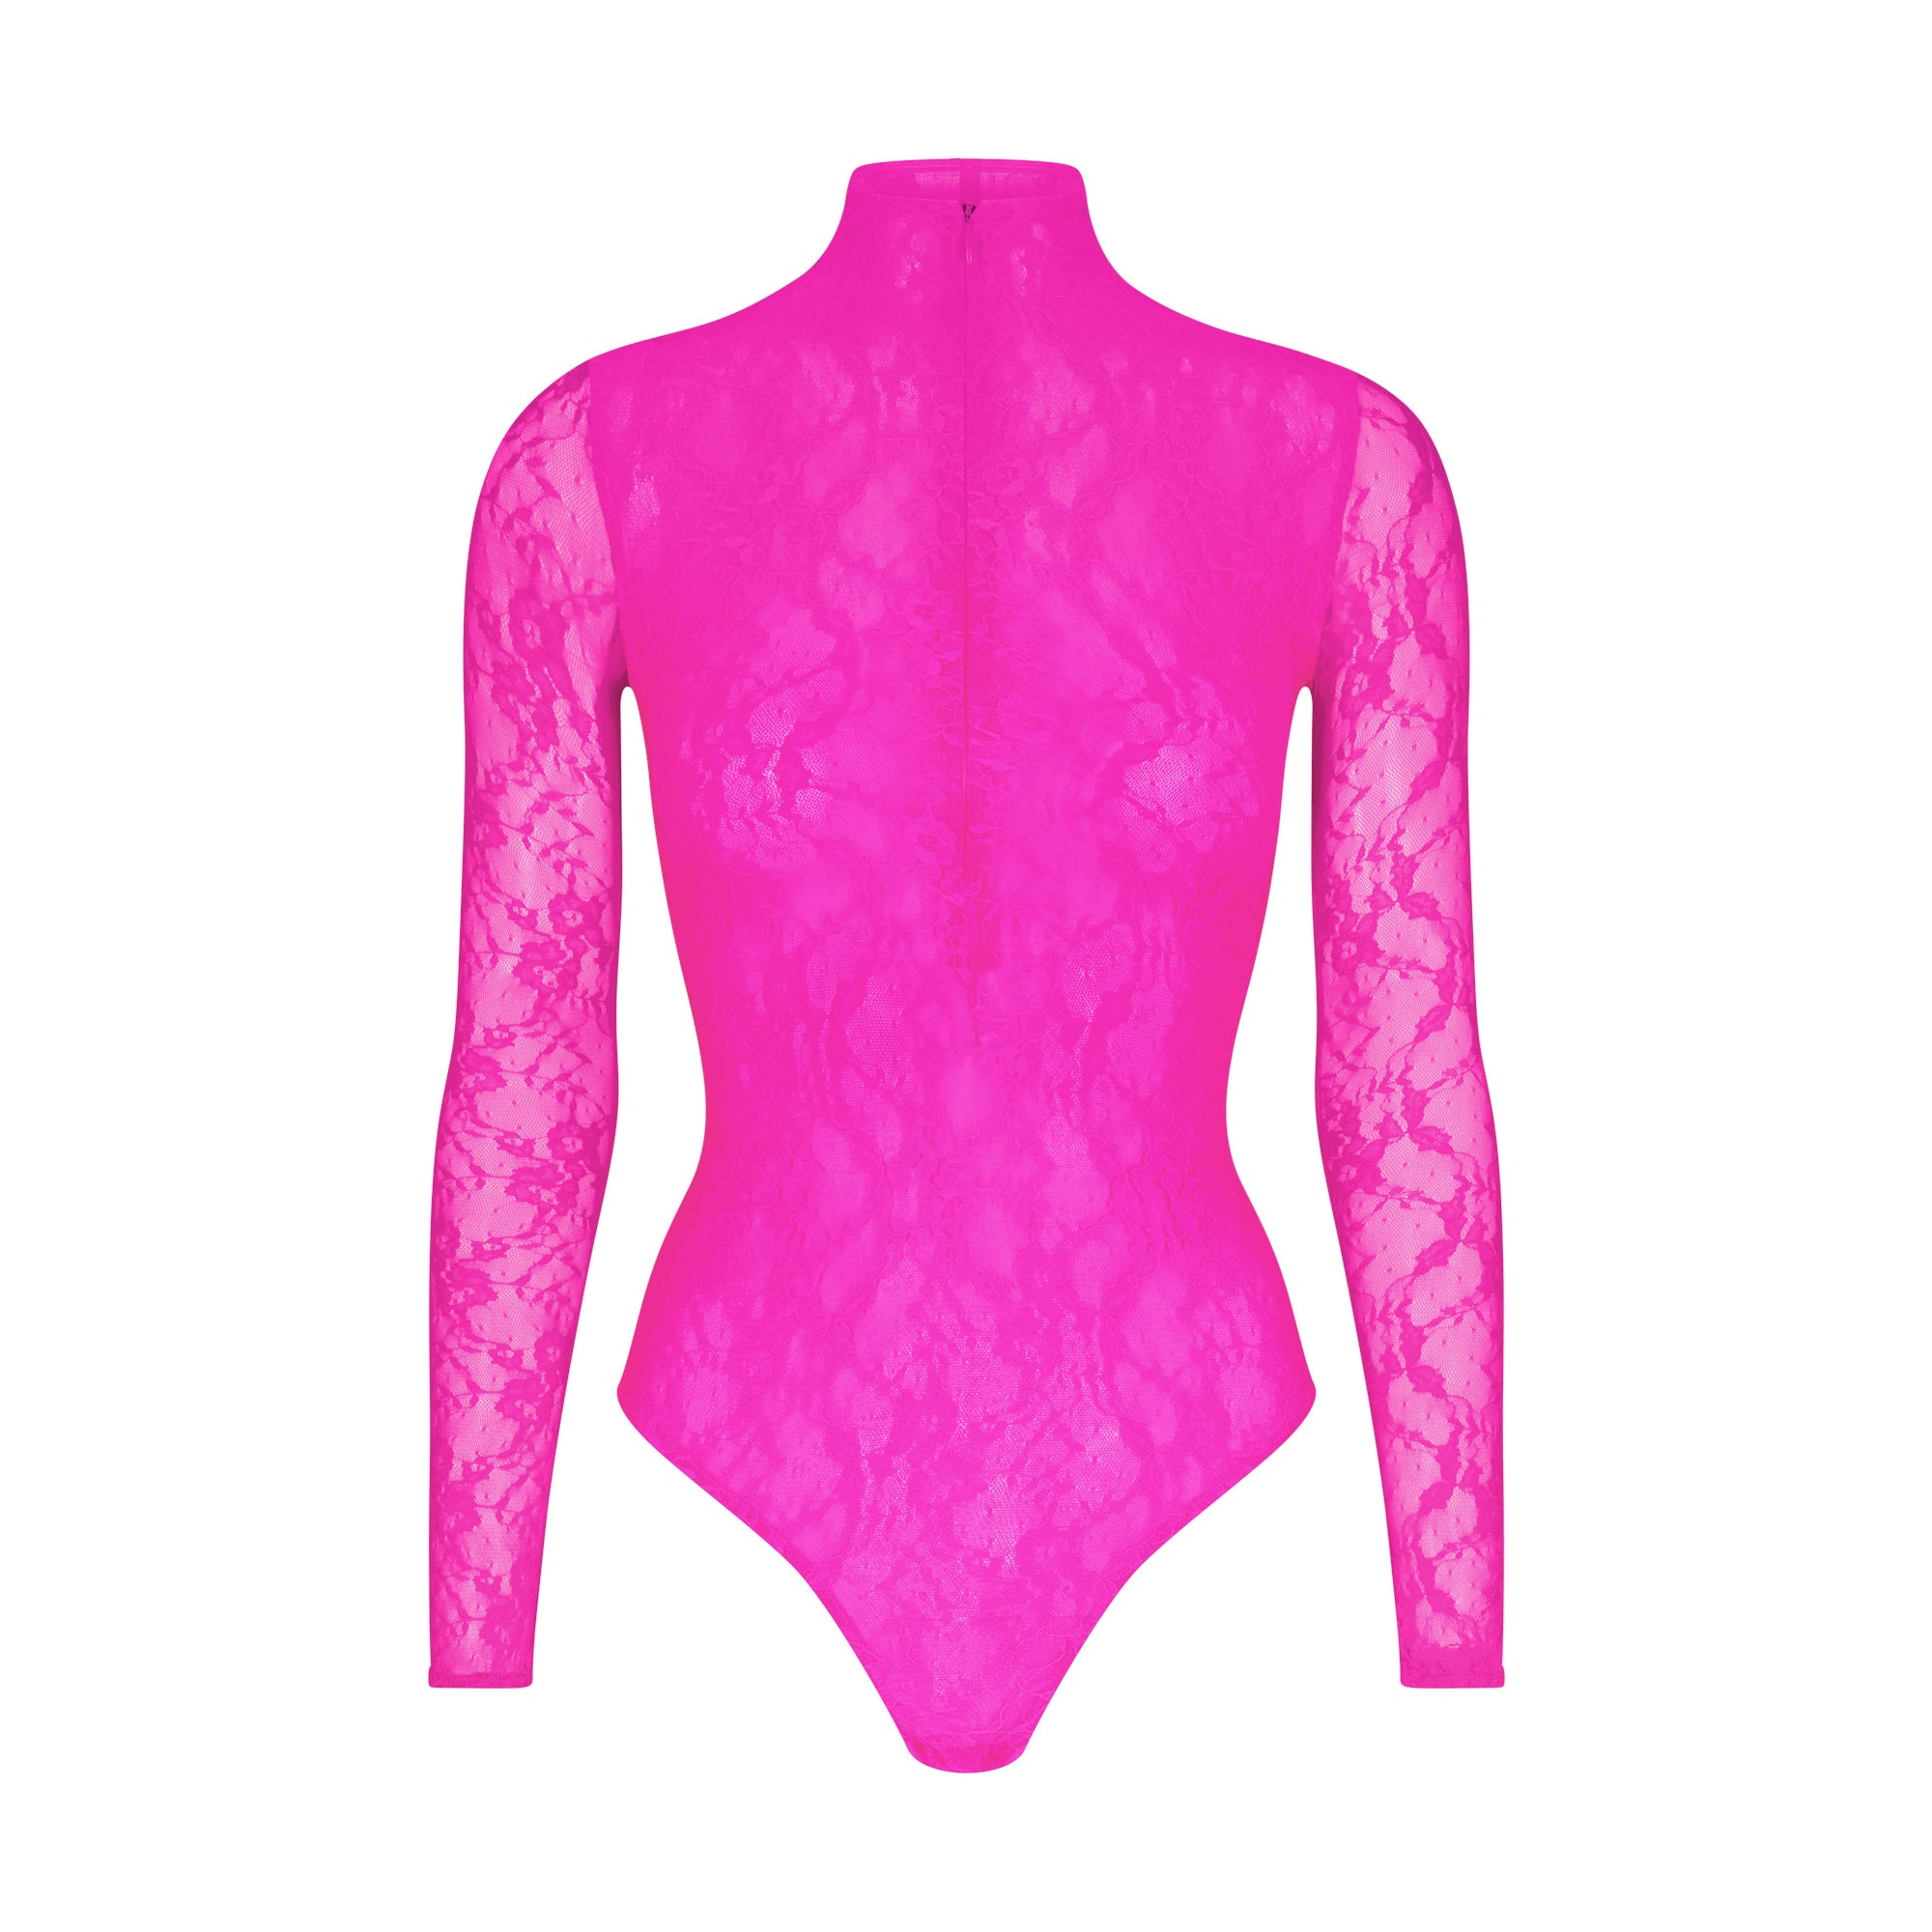 Me? Obsessed with a neon pink @SKIMS bodysuit? yes, yes I am 💕 #skims